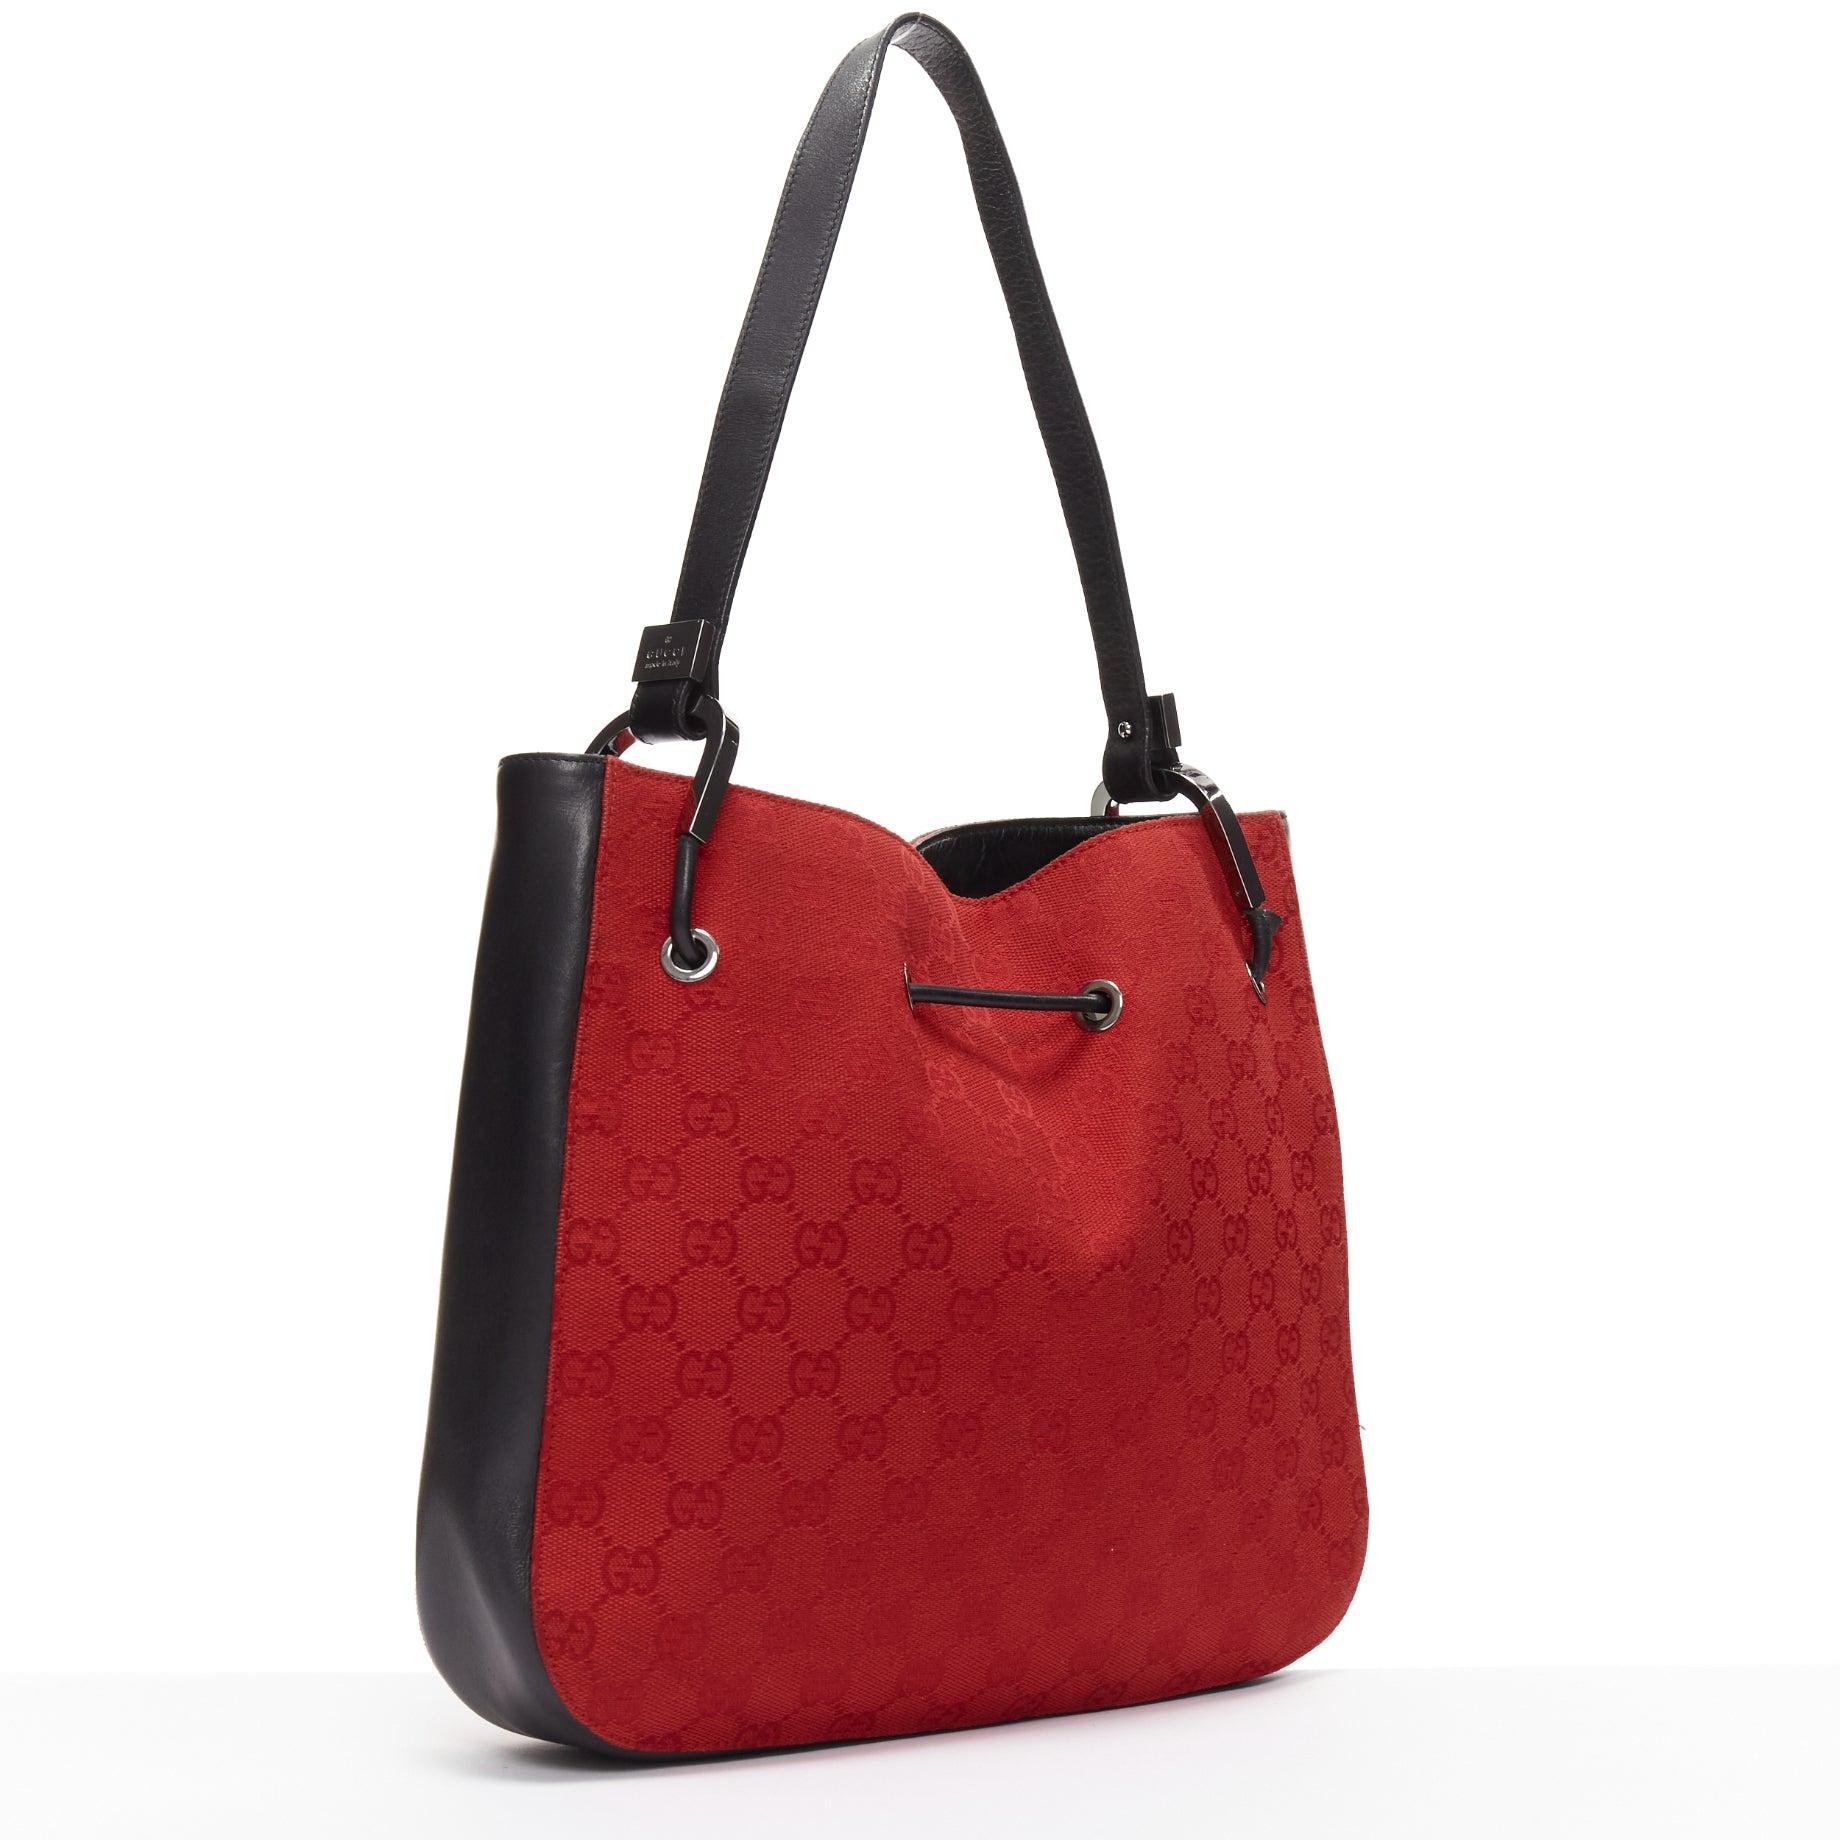 GUCCI Vintage red GG monogram canvas black leather drawstring bag
Reference: KNCN/A00046
Brand: Gucci
Material: Fabric, Leather
Color: Red, Black
Pattern: Monogram
Closure: Drawstring
Lining: Black Leather
Extra Details: This shoulder bag features a